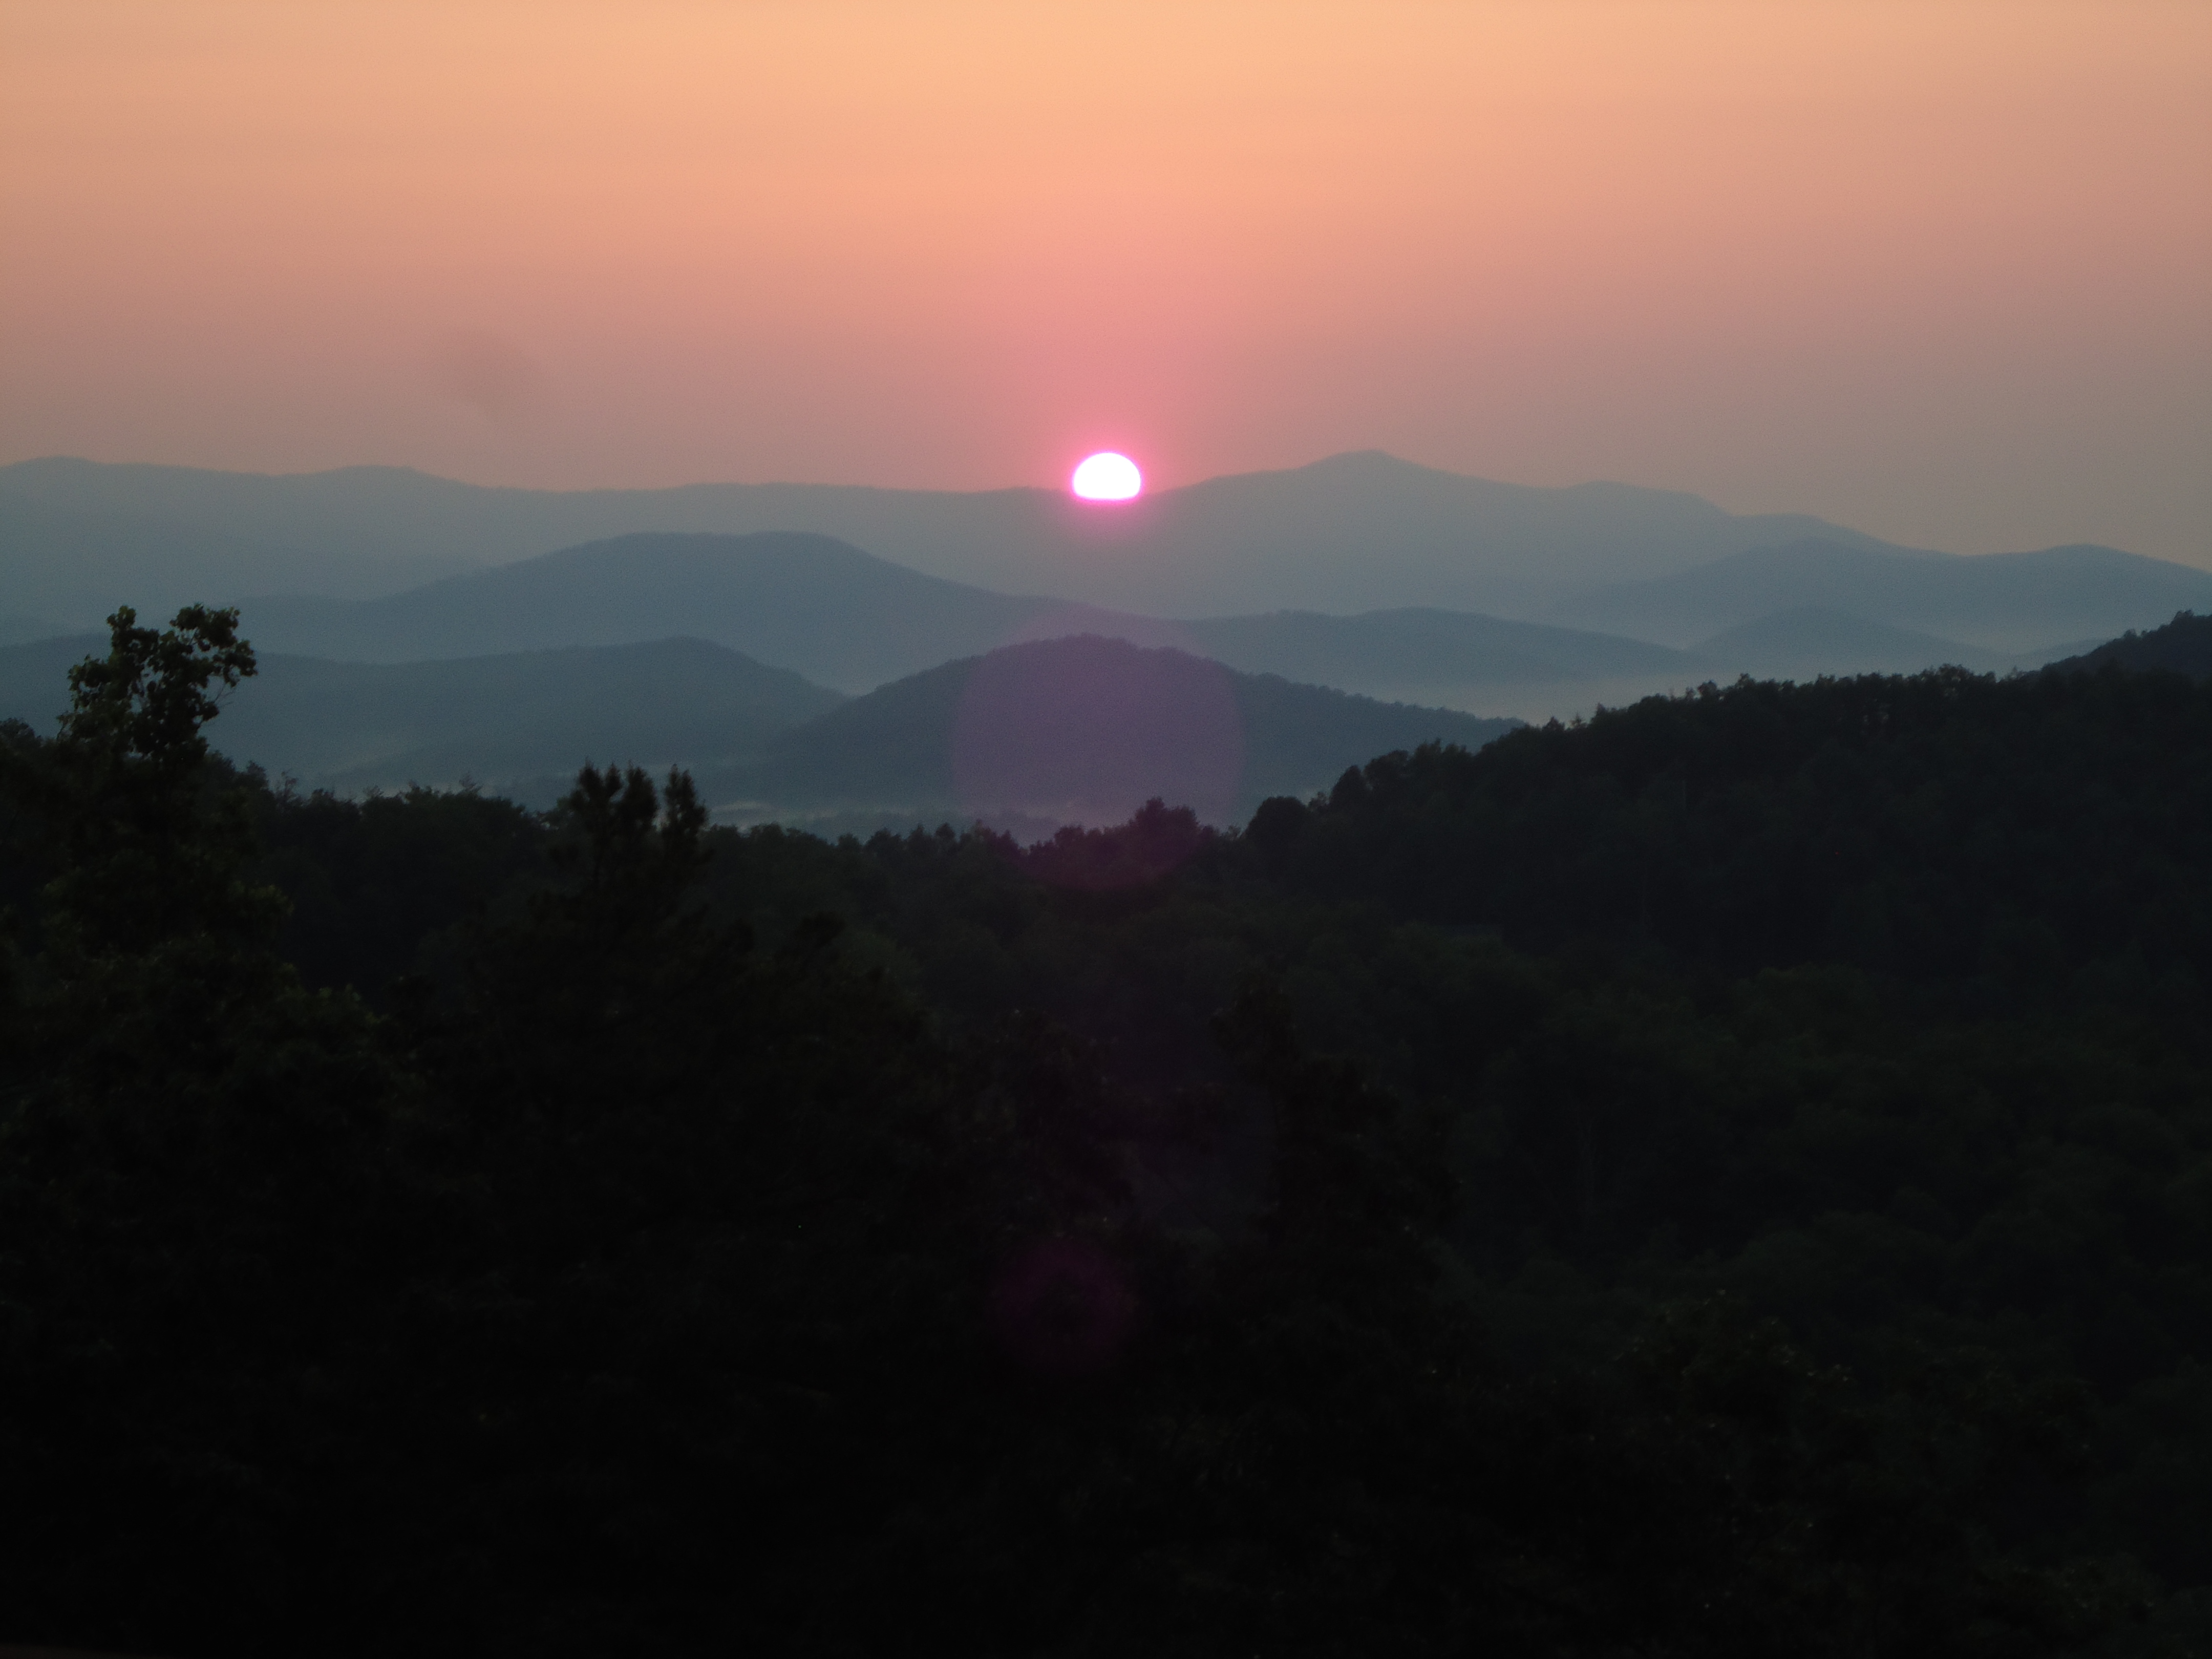 Sunrise from the Back Porch, Hawks Nest, NC